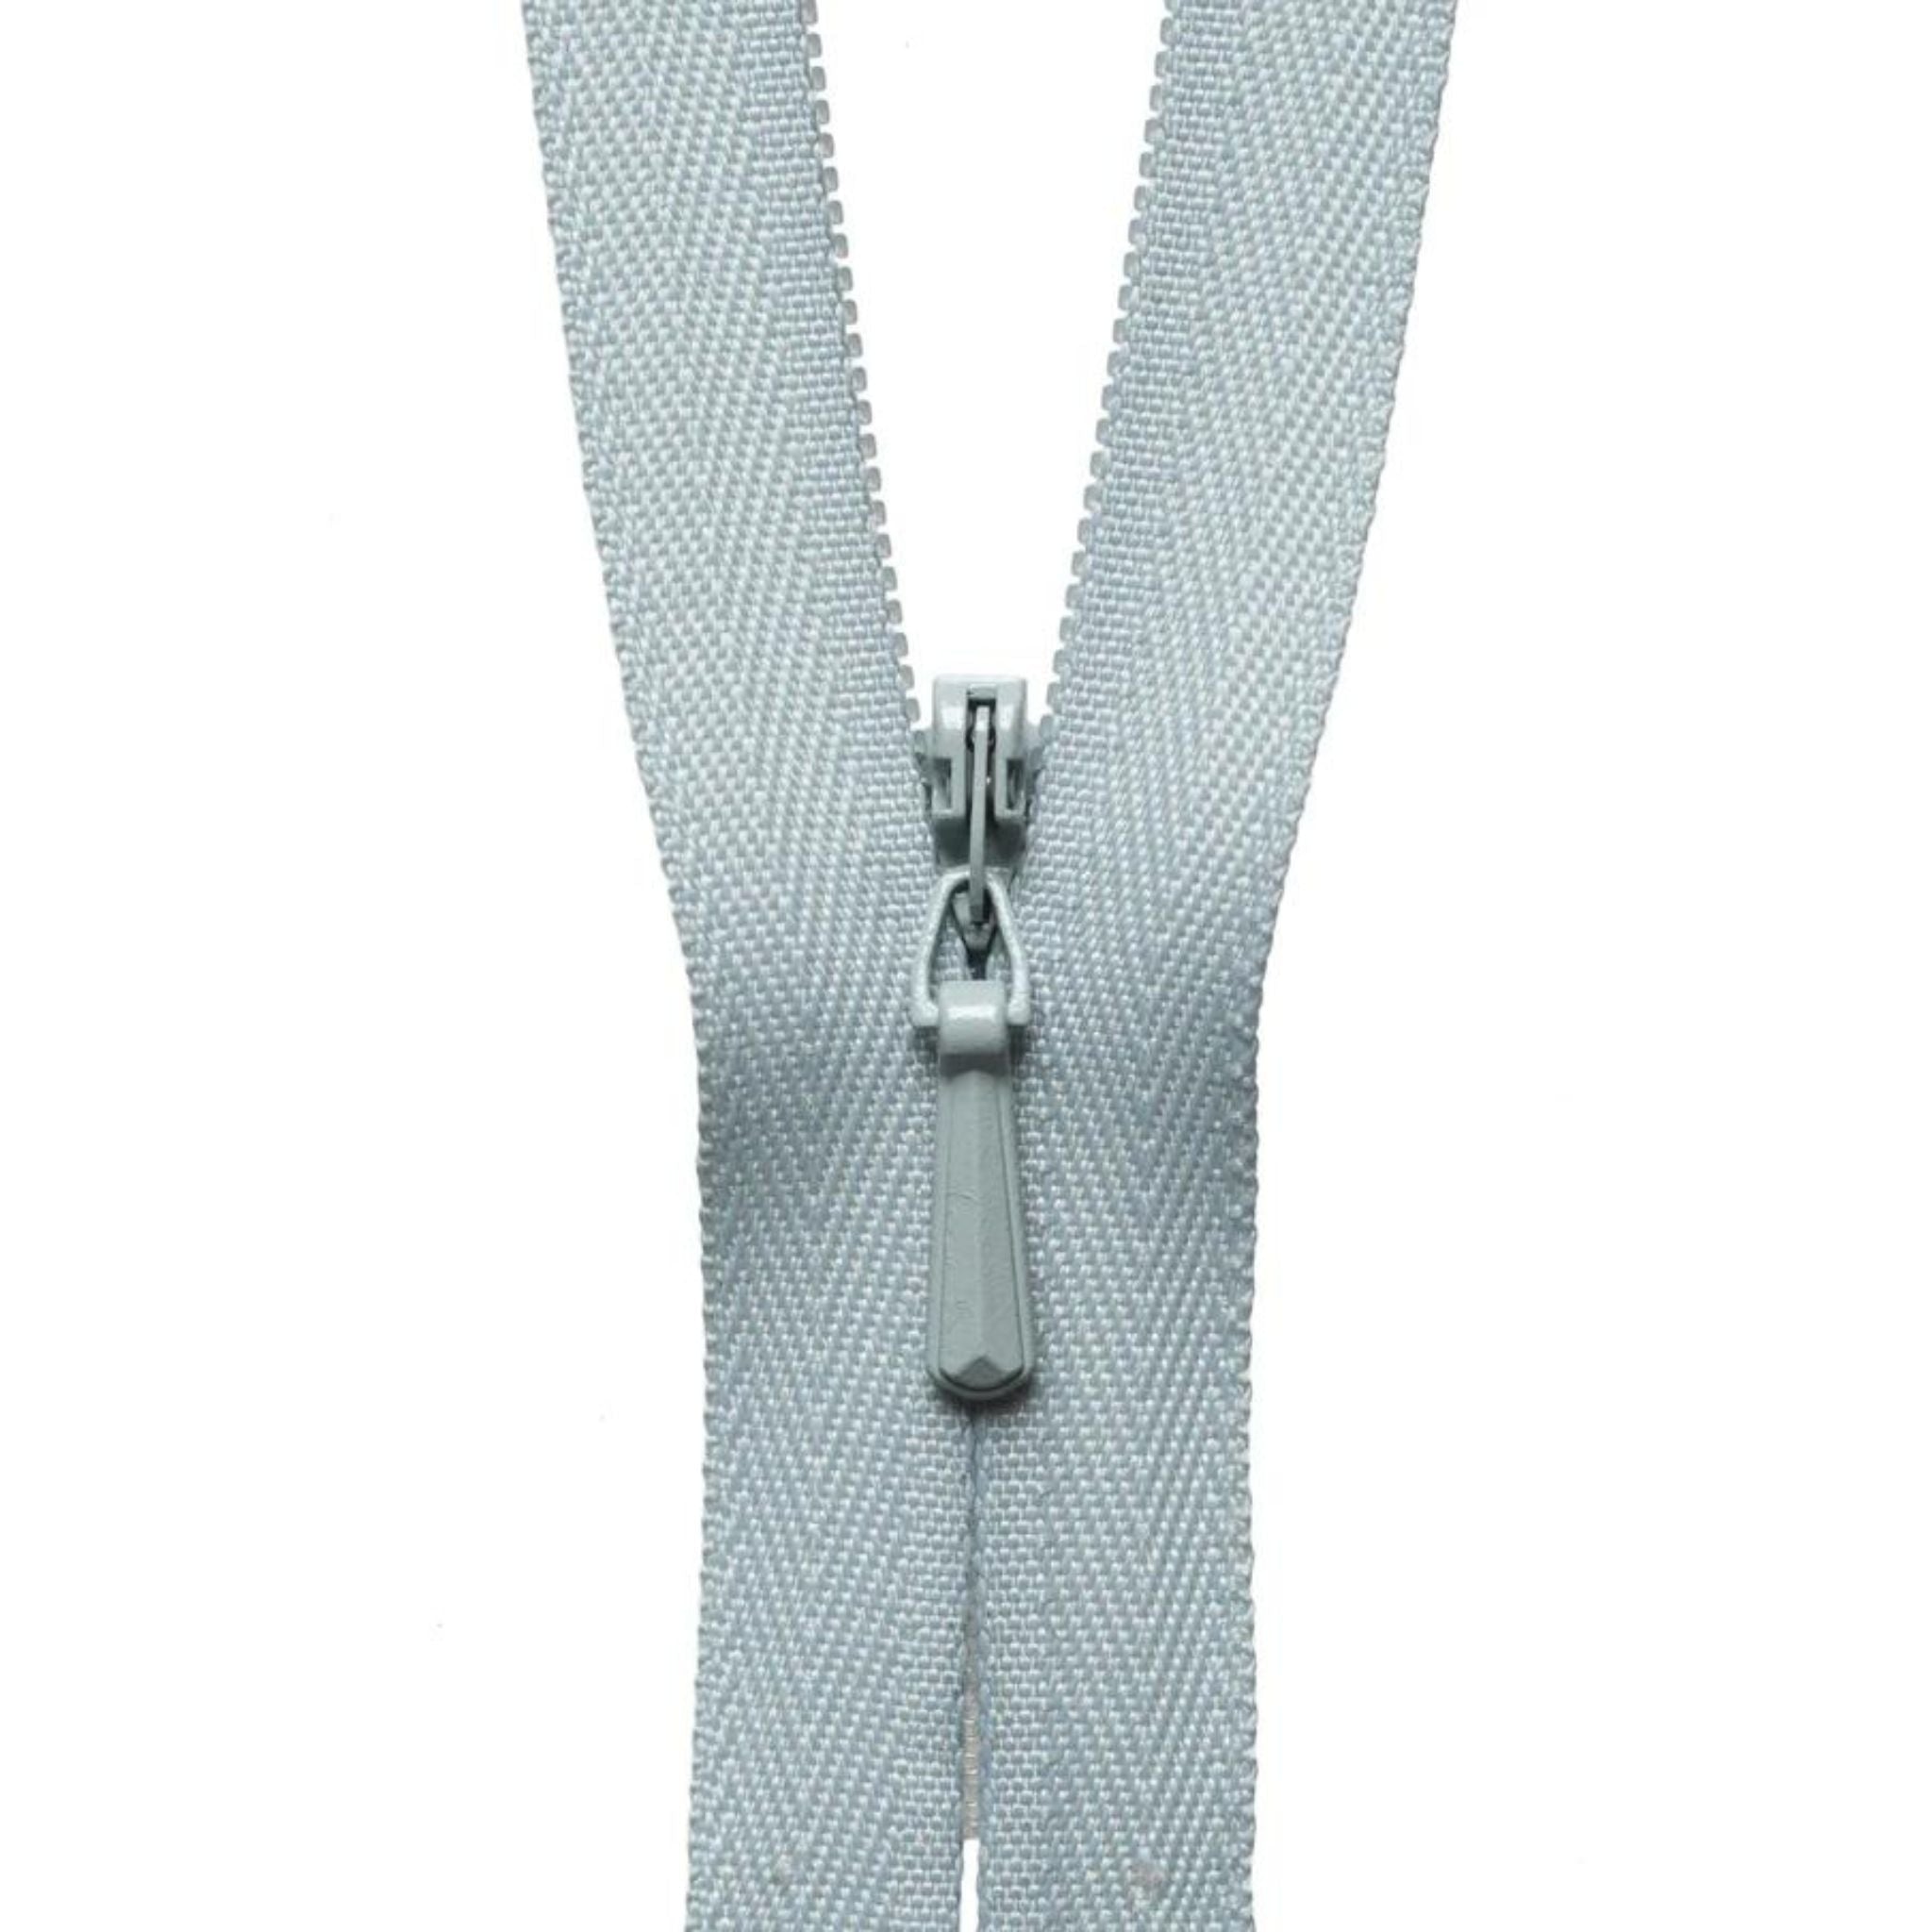 YKK Concealed/Invisible Zip - 30cm / 12'' - Pale Grey 574